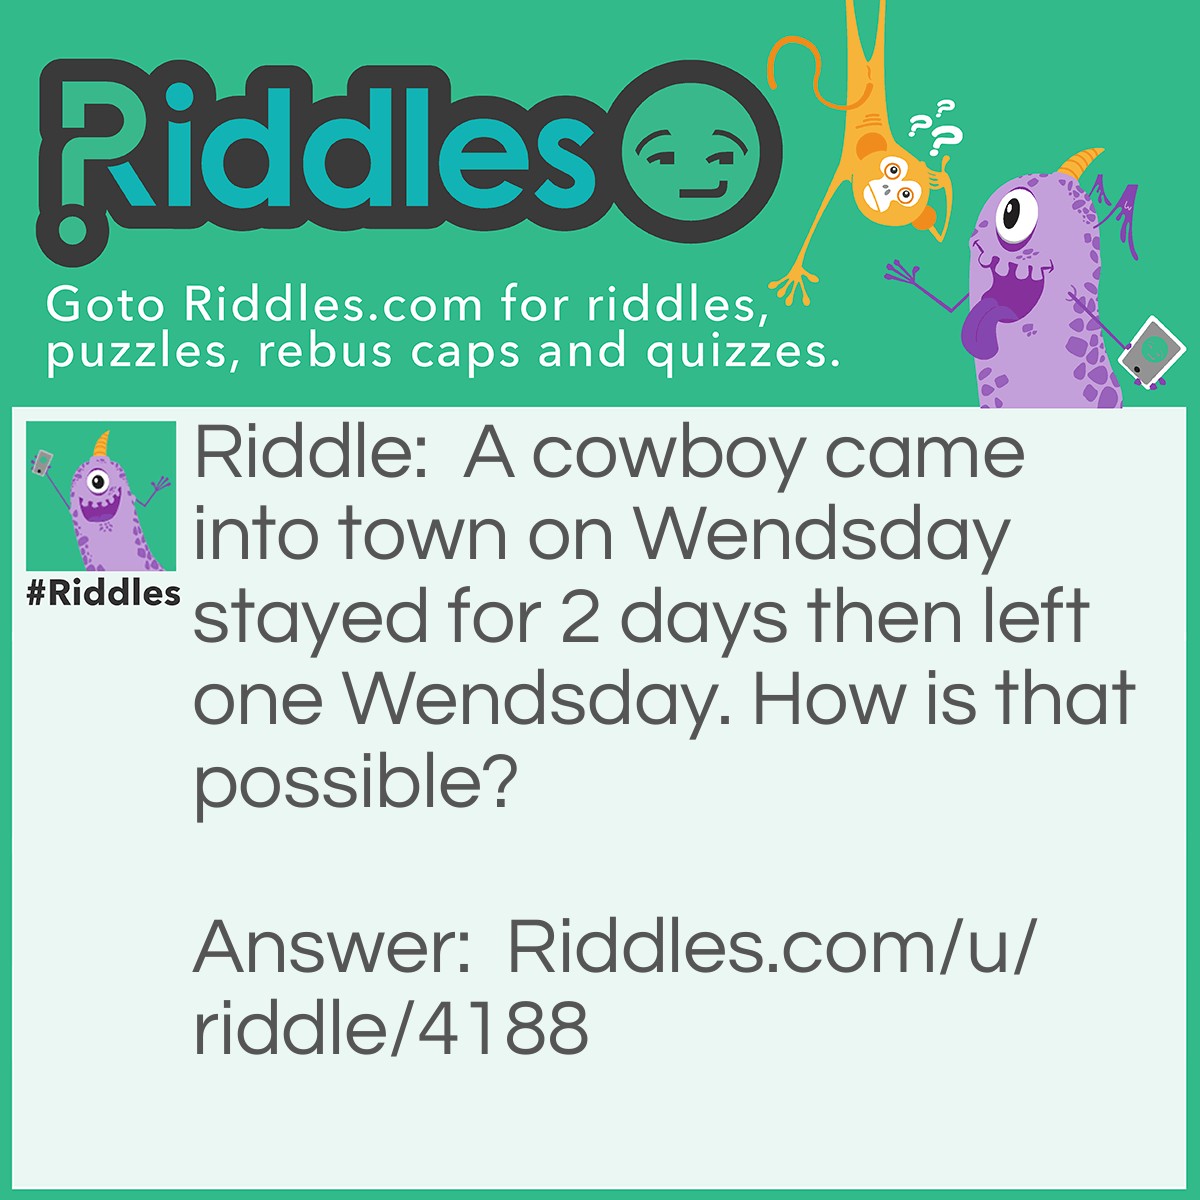 Riddle: A cowboy came into town on Wendsday stayed for 2 days then left one Wendsday. How is that possible? Answer: The horses name is Wednesday.